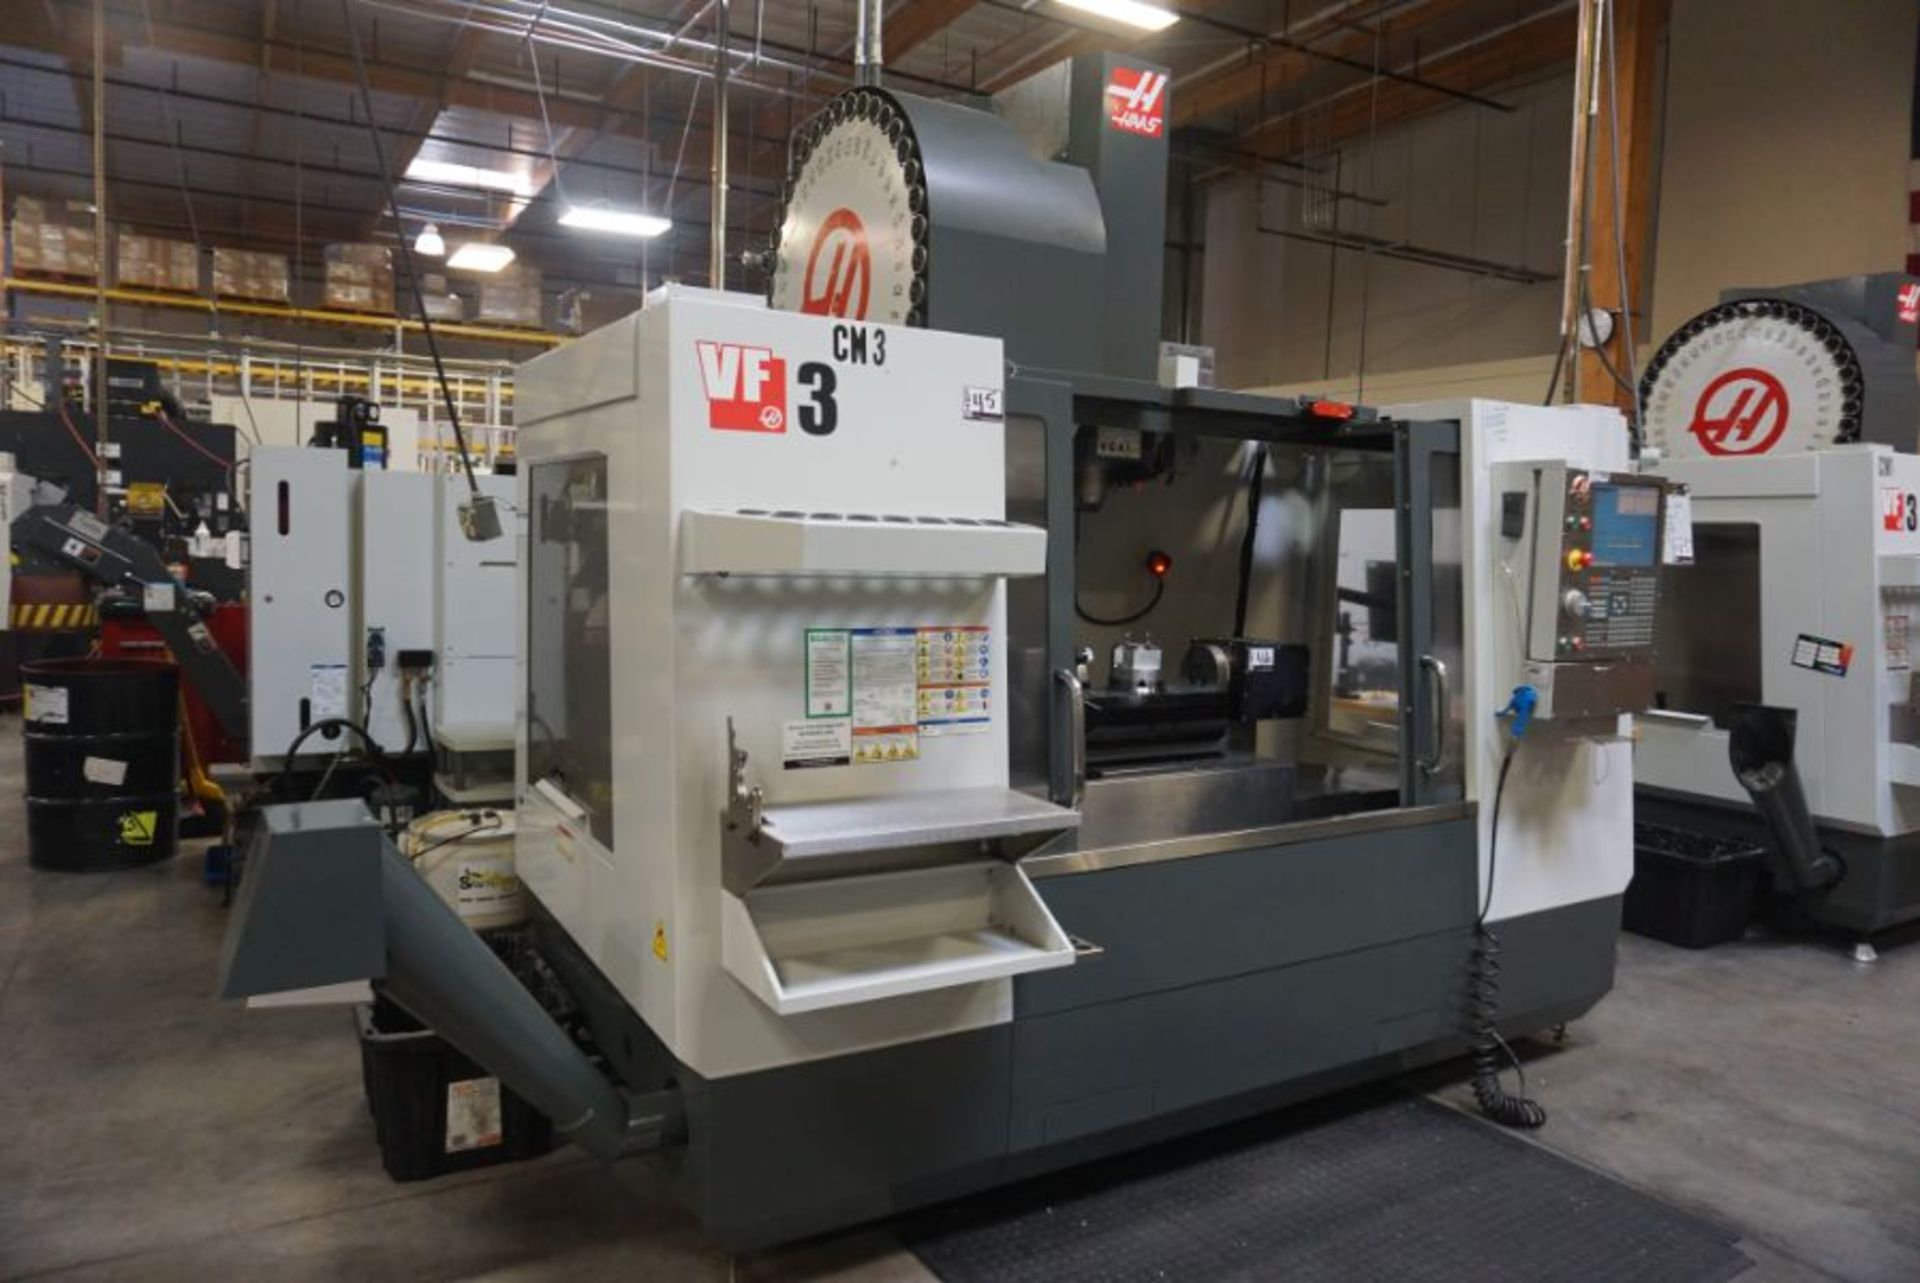 Haas VF-3 Vertical Machining Center, New 2011 - Image 2 of 7